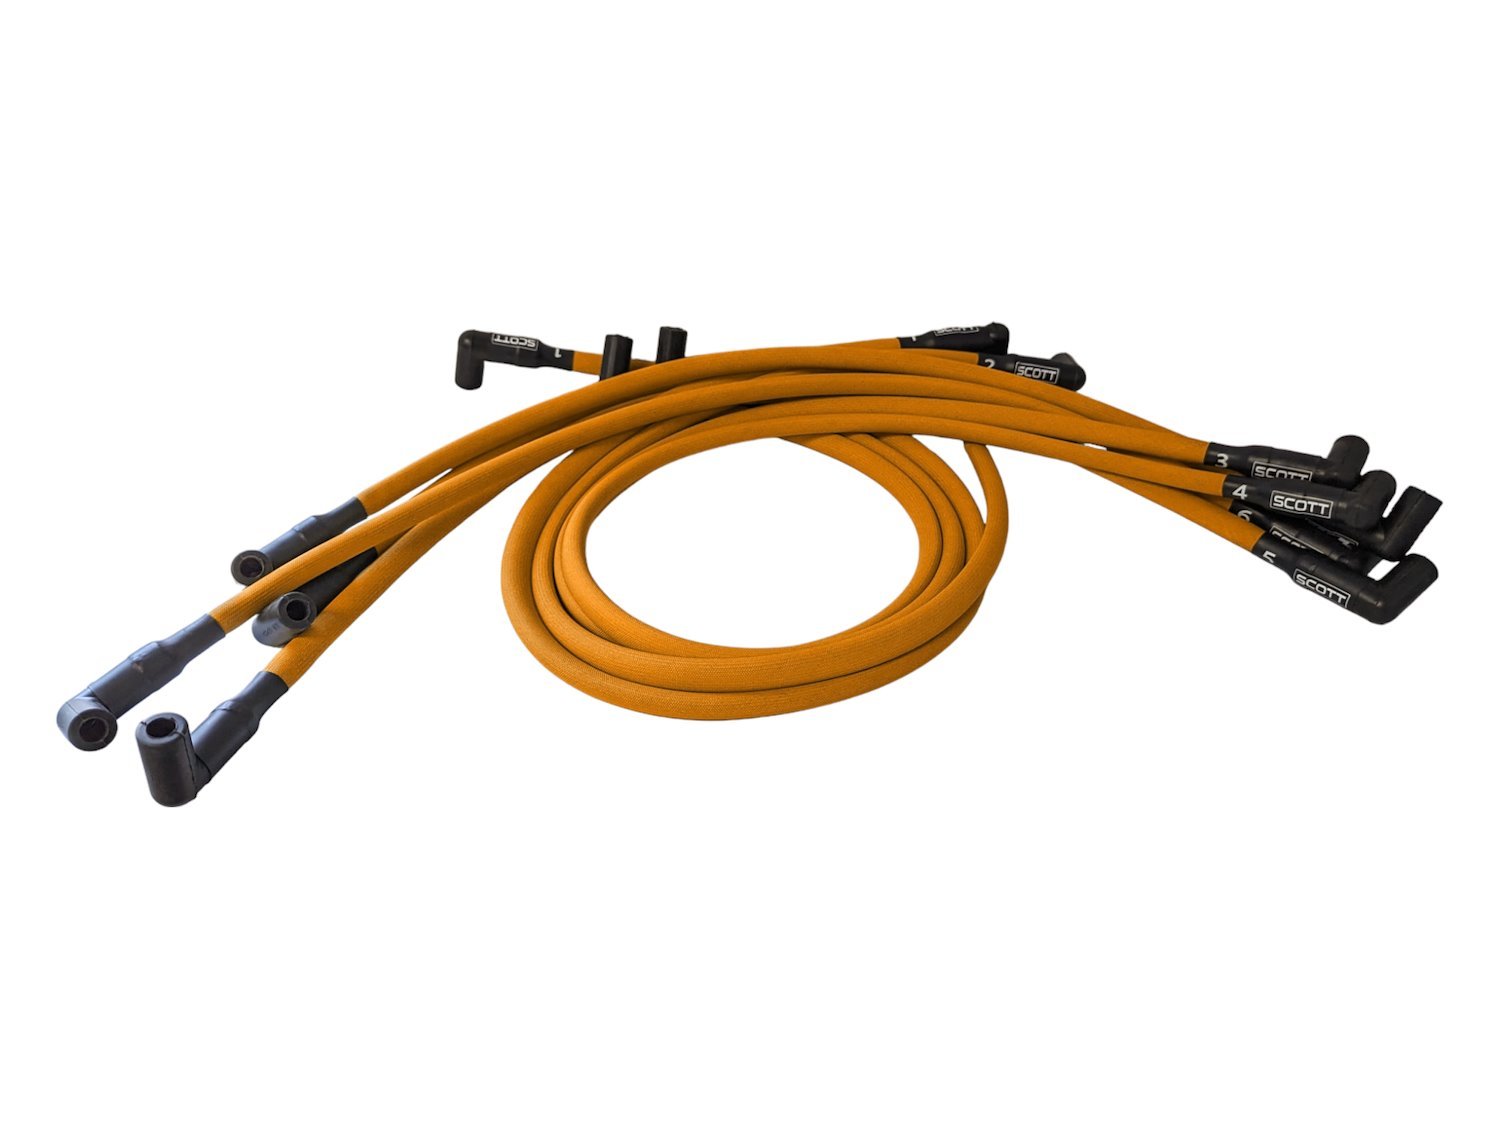 SPW300-PS-435-6 Super Mag Fiberglass-Oversleeved Spark Plug Wire Set for Small Block Chevy, Around Front [Orange]